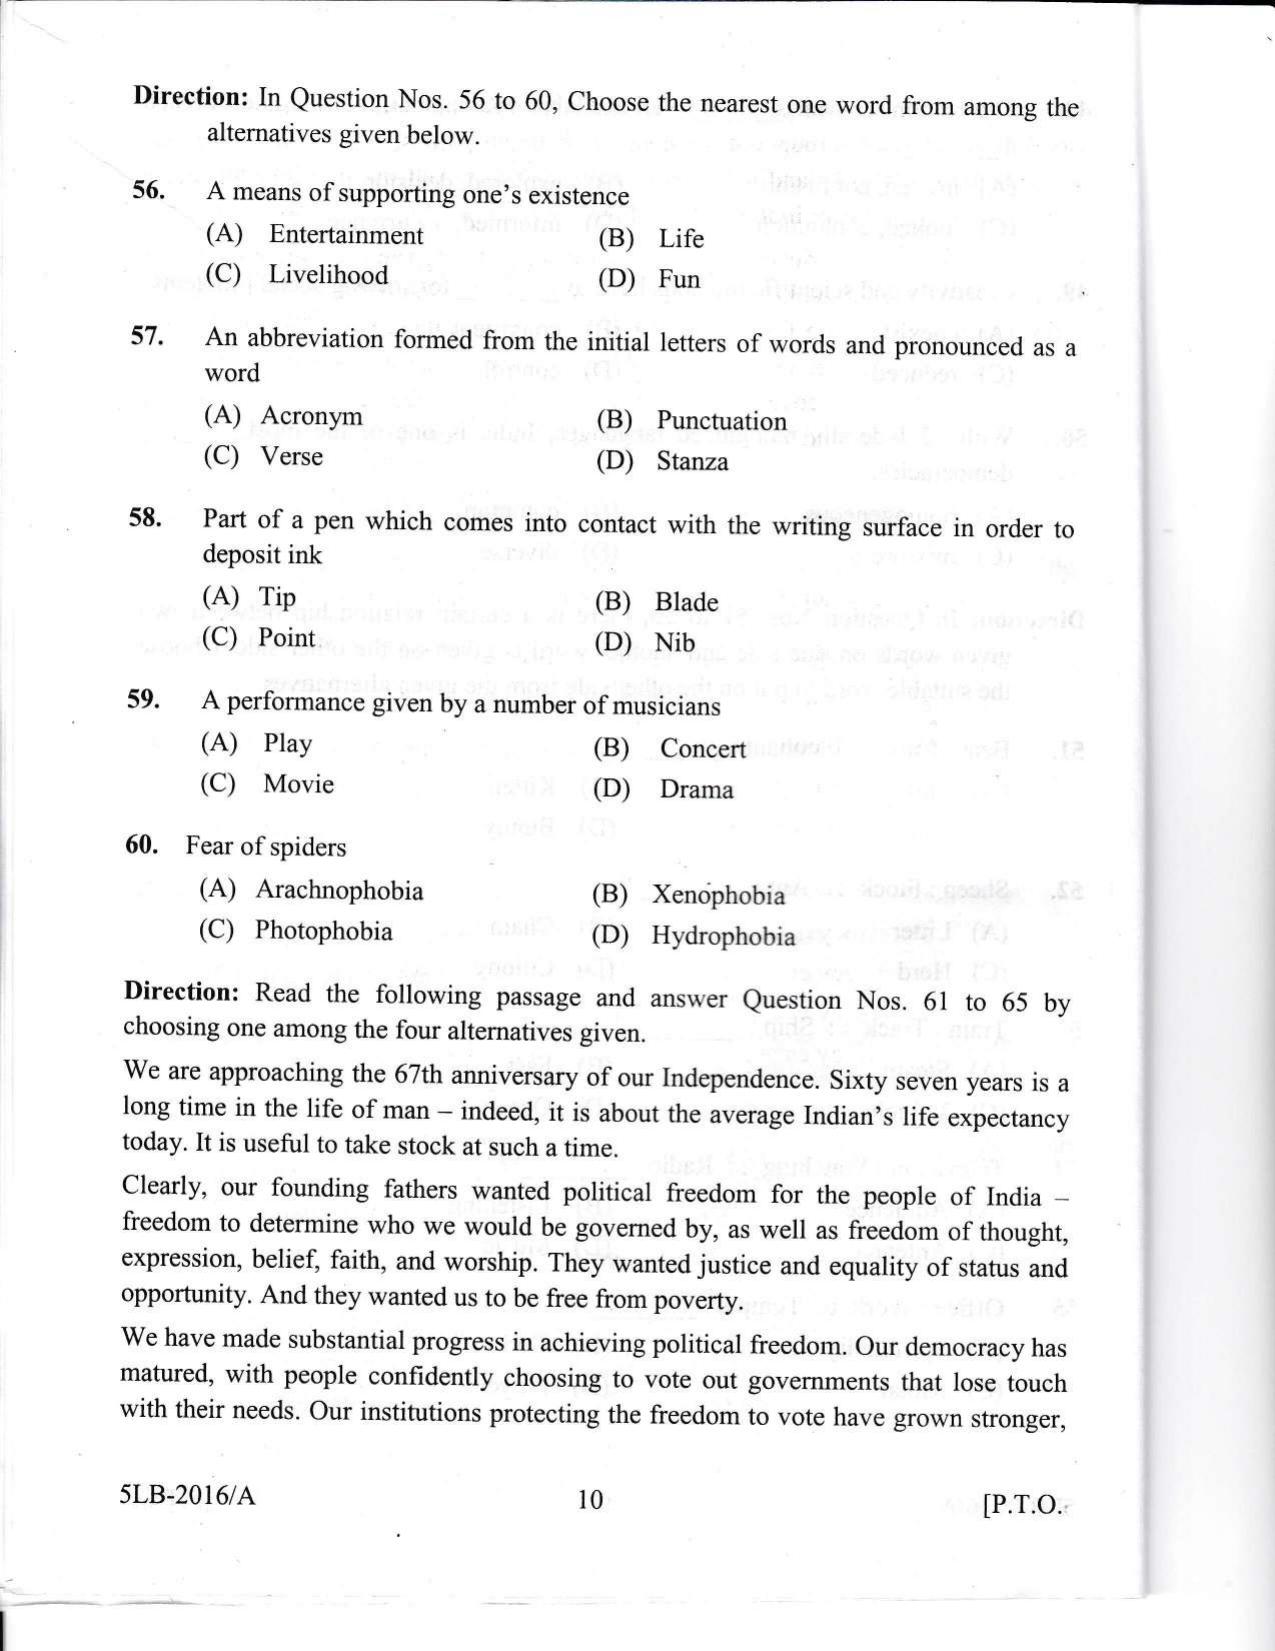 KLEE 5 Year LLB Exam 2016 Question Paper - Page 10